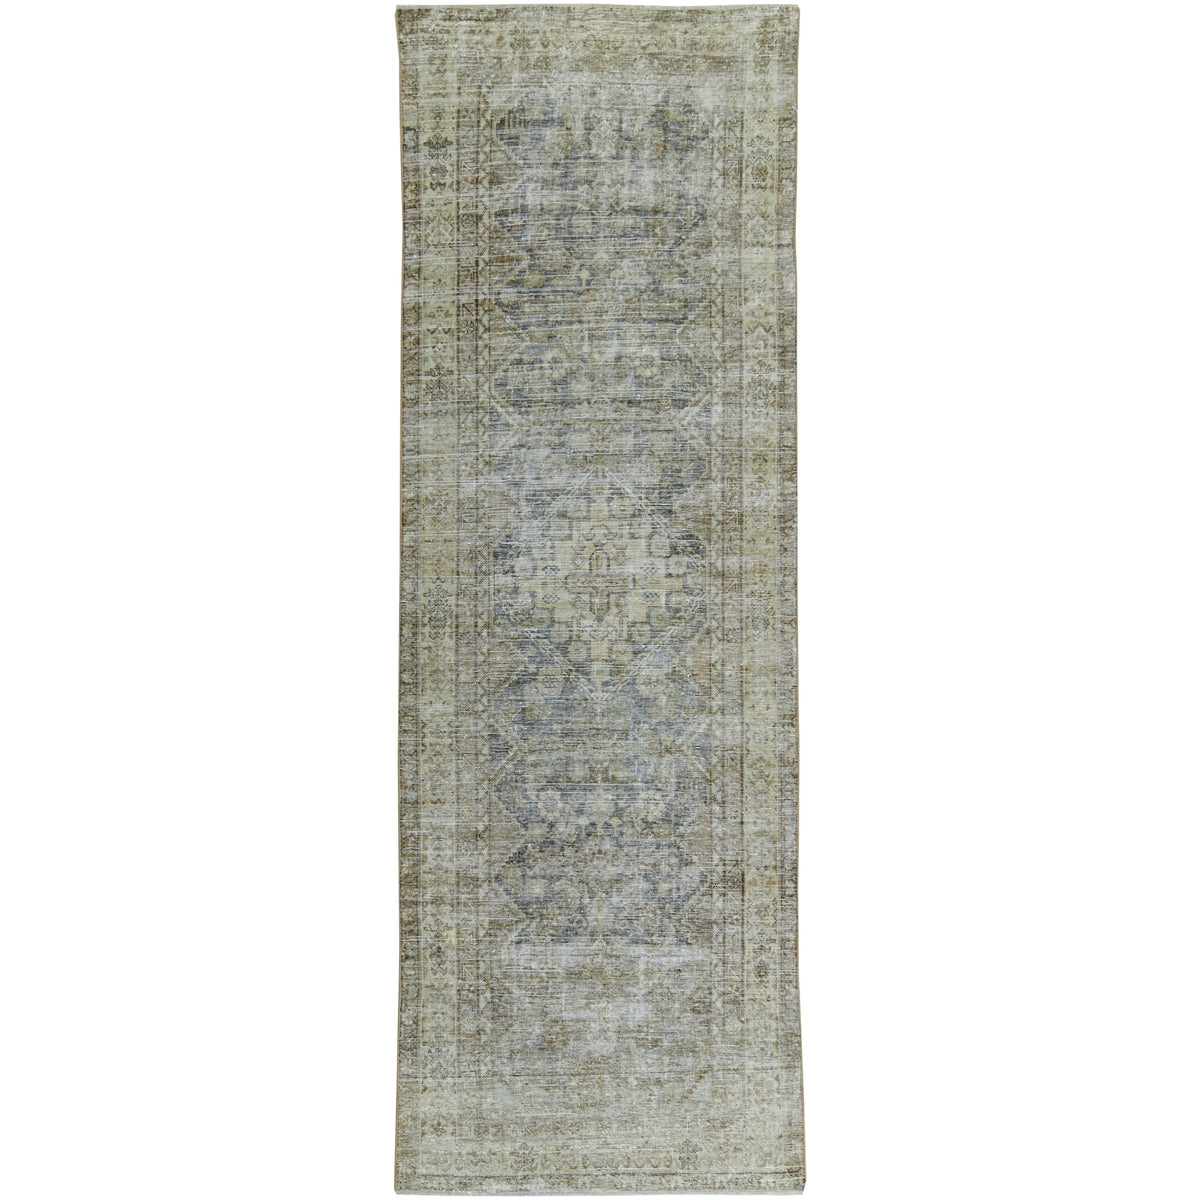 Portia - Vintage Turkish Rug, Enriching Spaces with Timeless Beauty | Kuden Rugs